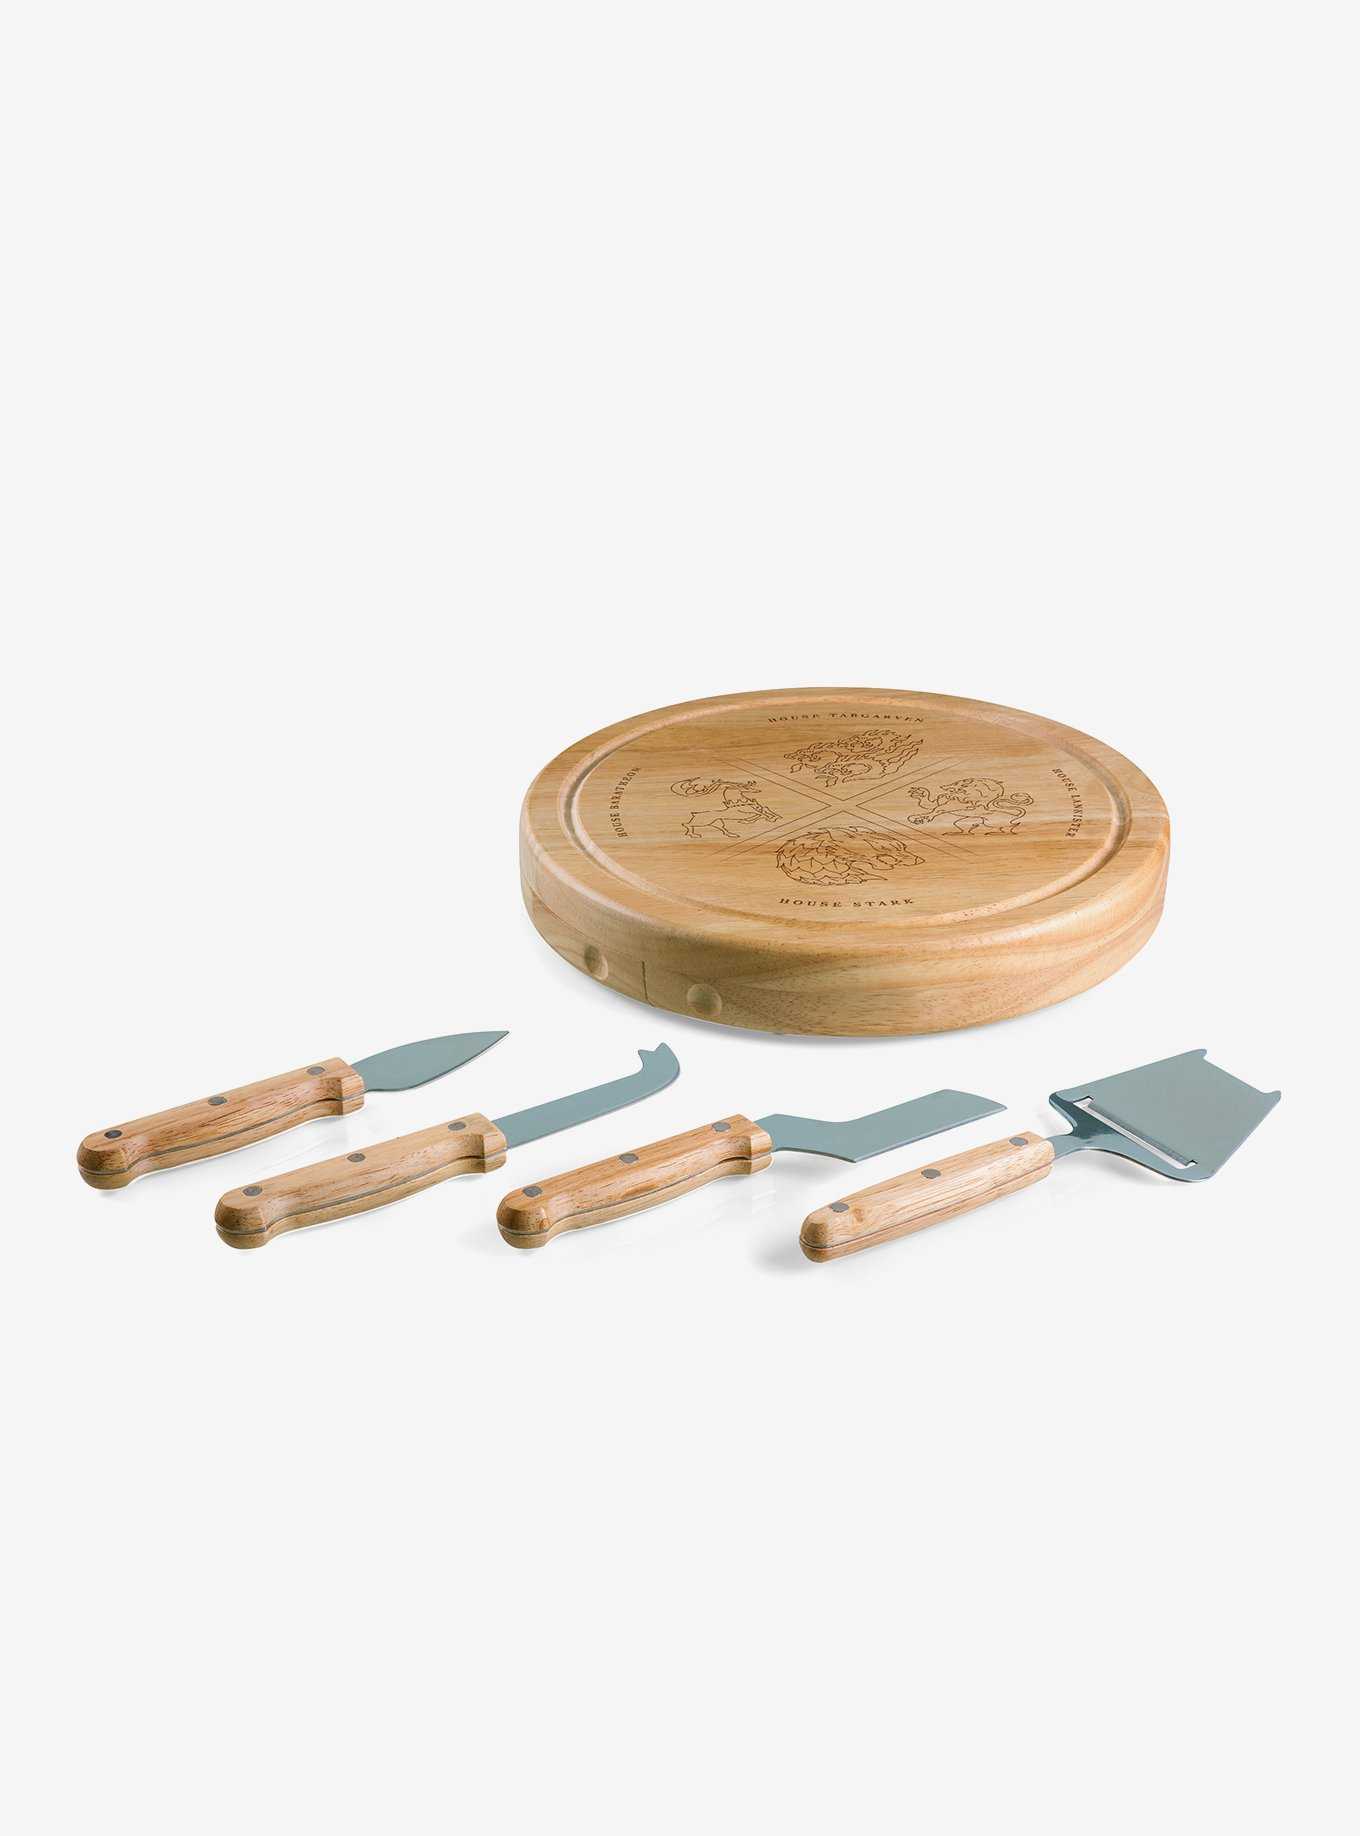 Game of Thrones Circo Cheese Cutting Board & Tools Set, , hi-res